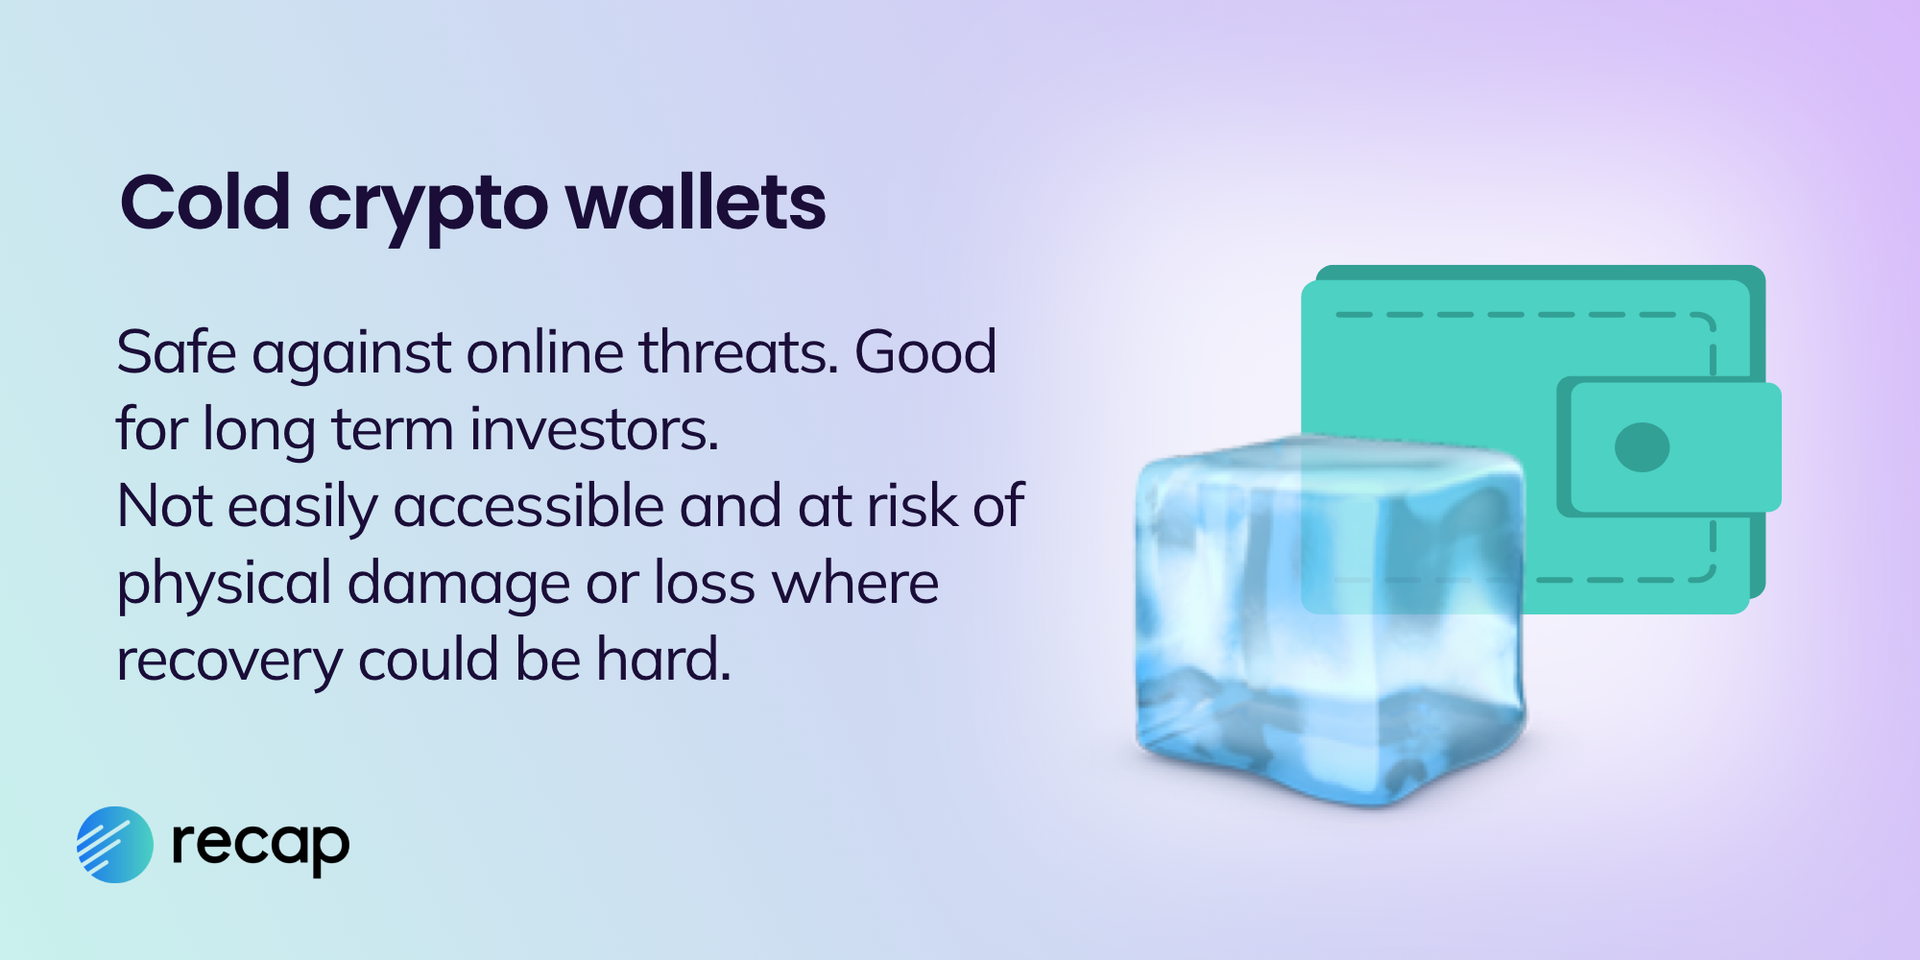 Recap infographic stating that cold crypto wallets are safe against online threats and good for long term investors, however, not easily accessible and at risk of physical damage or loss where recovery could be hard.